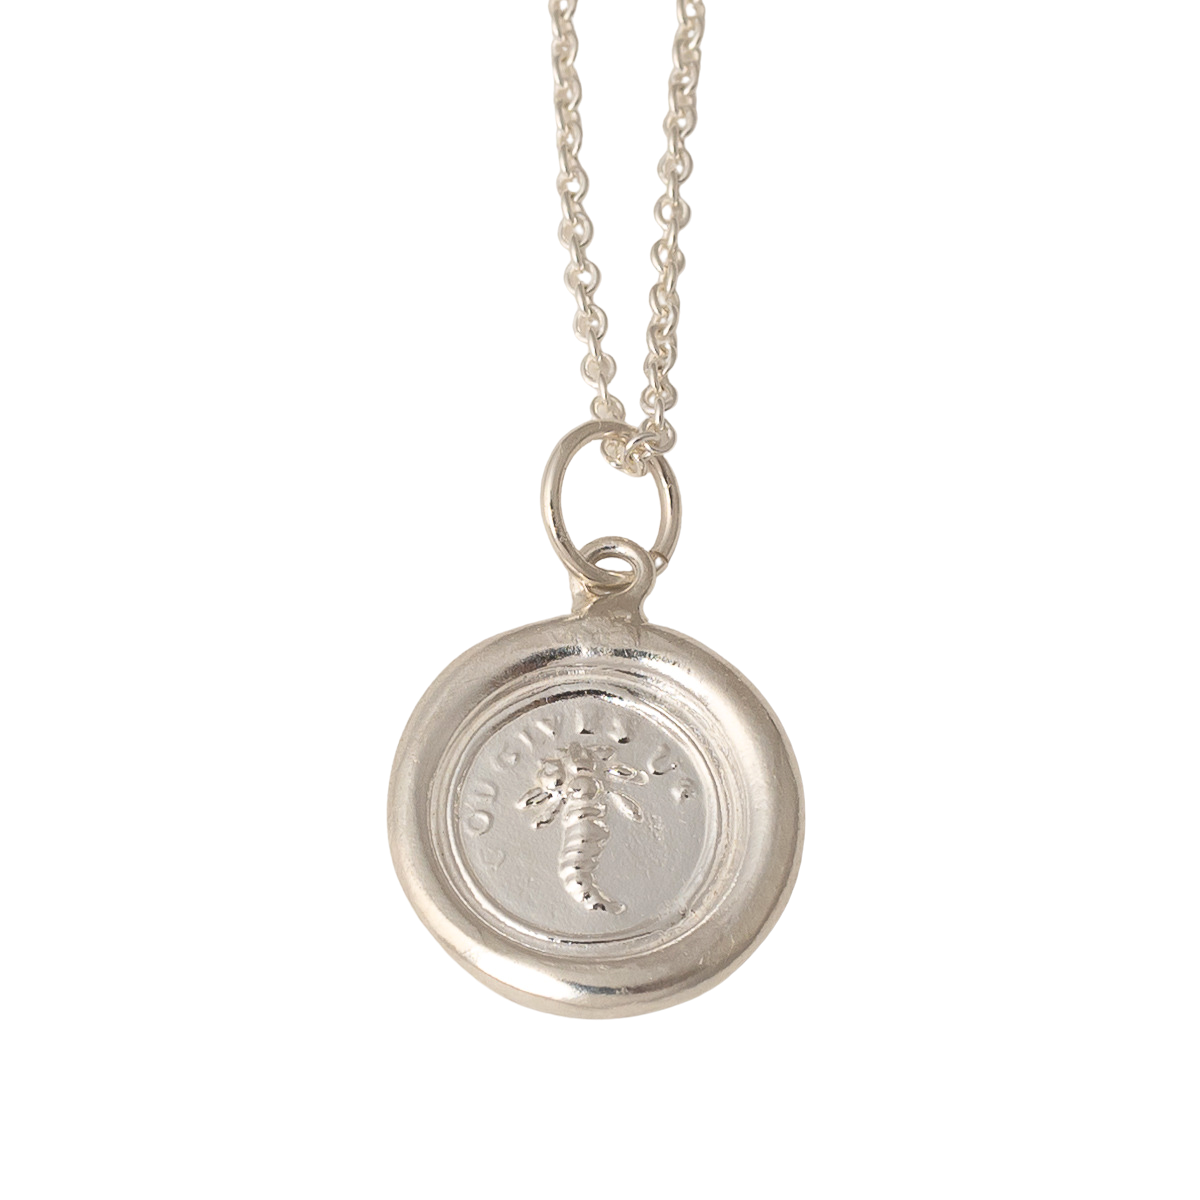 Count Your Blessings Pendant